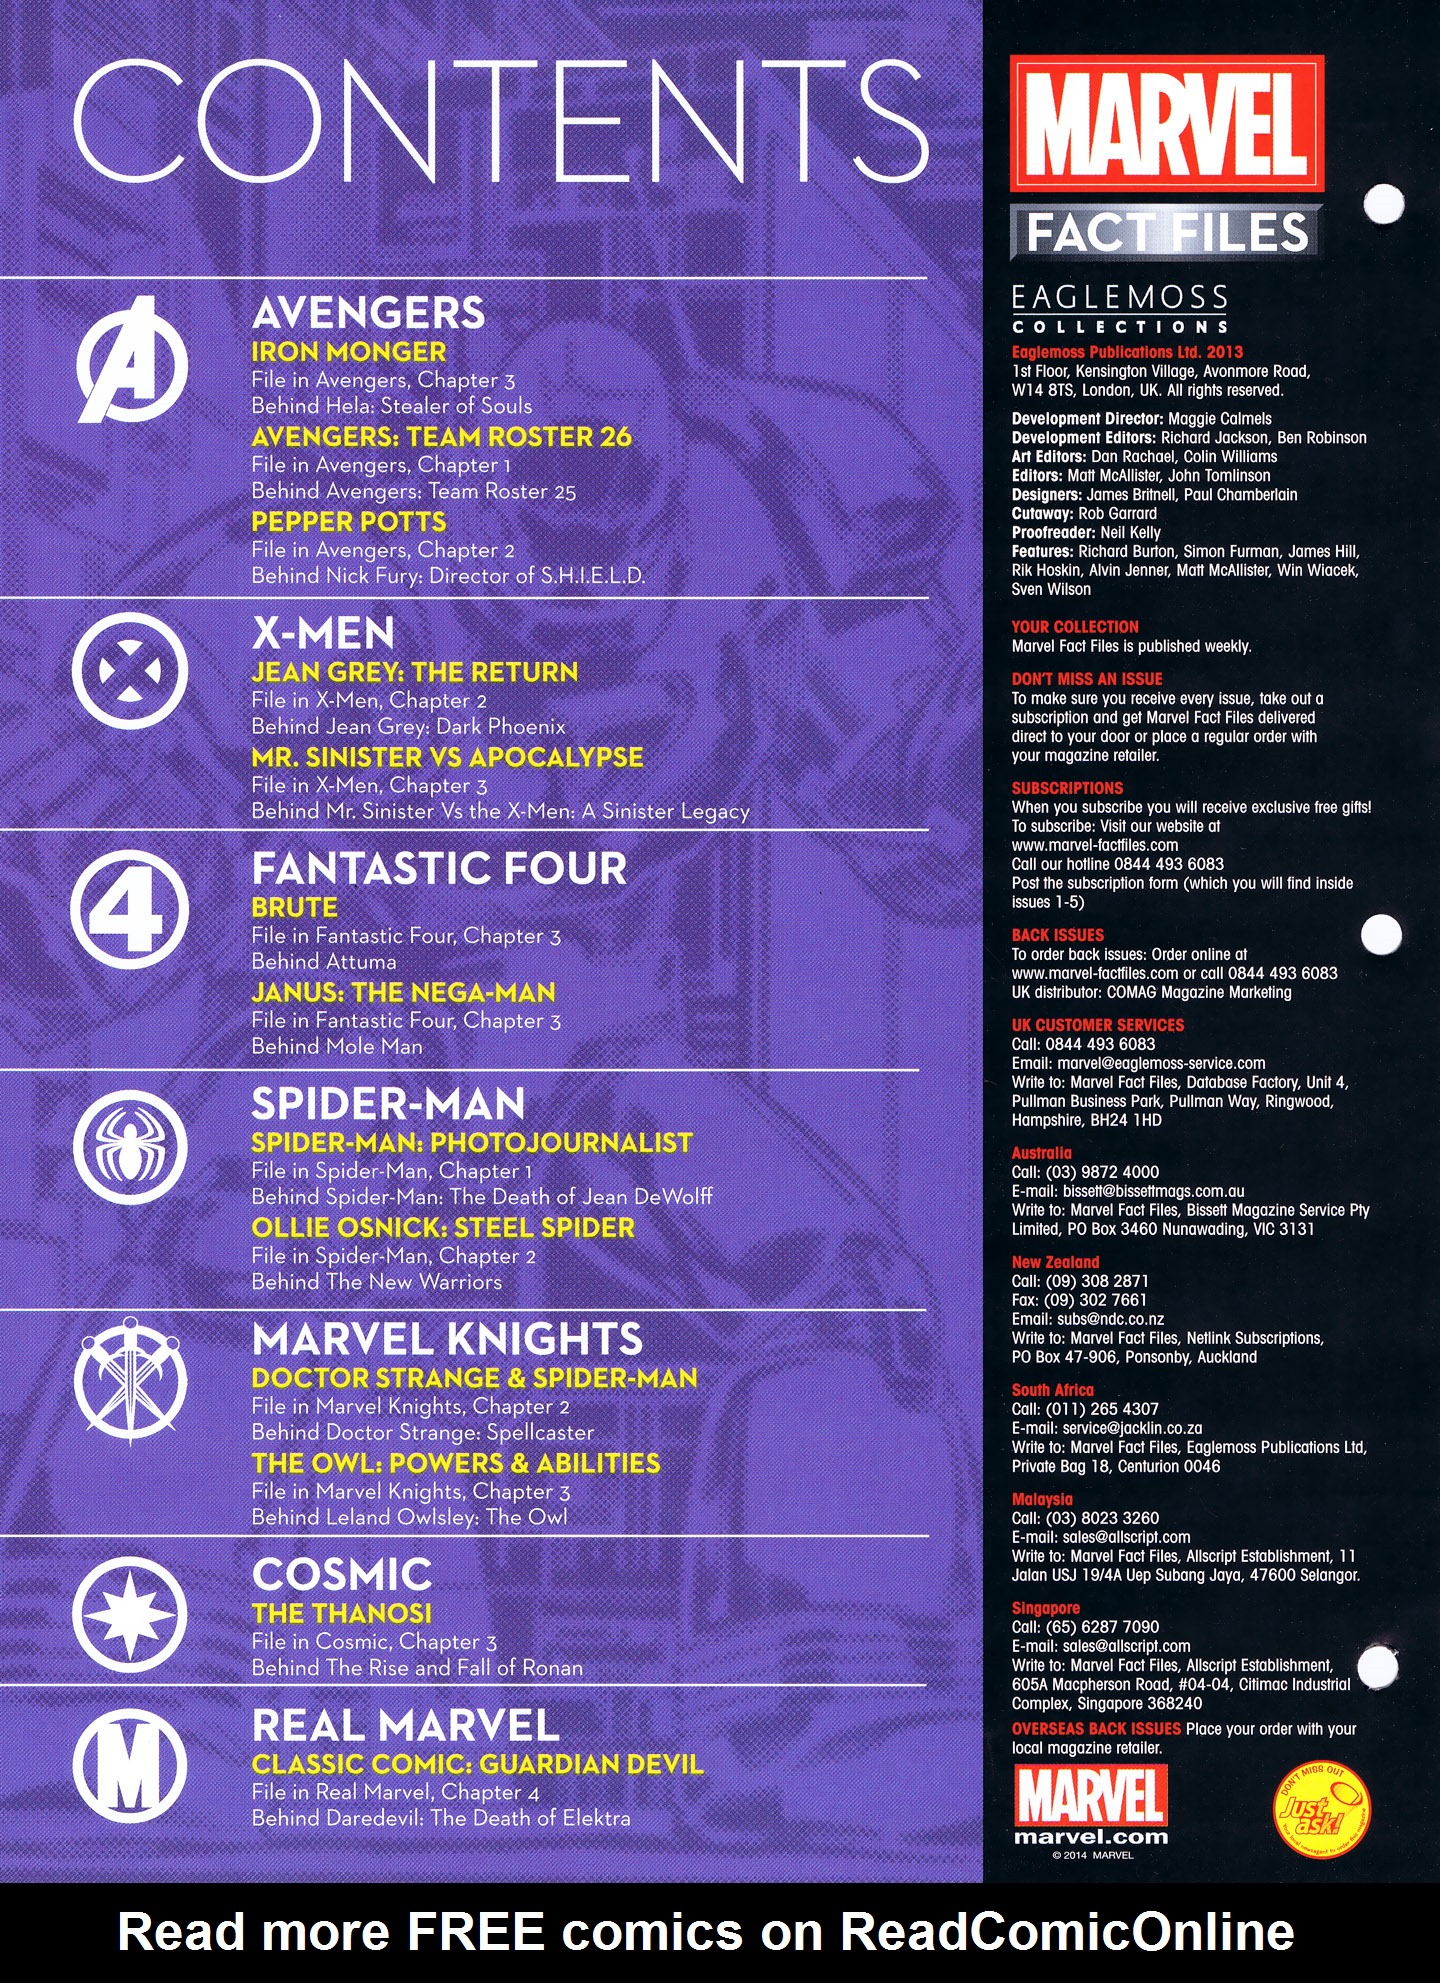 Read online Marvel Fact Files comic -  Issue #54 - 2